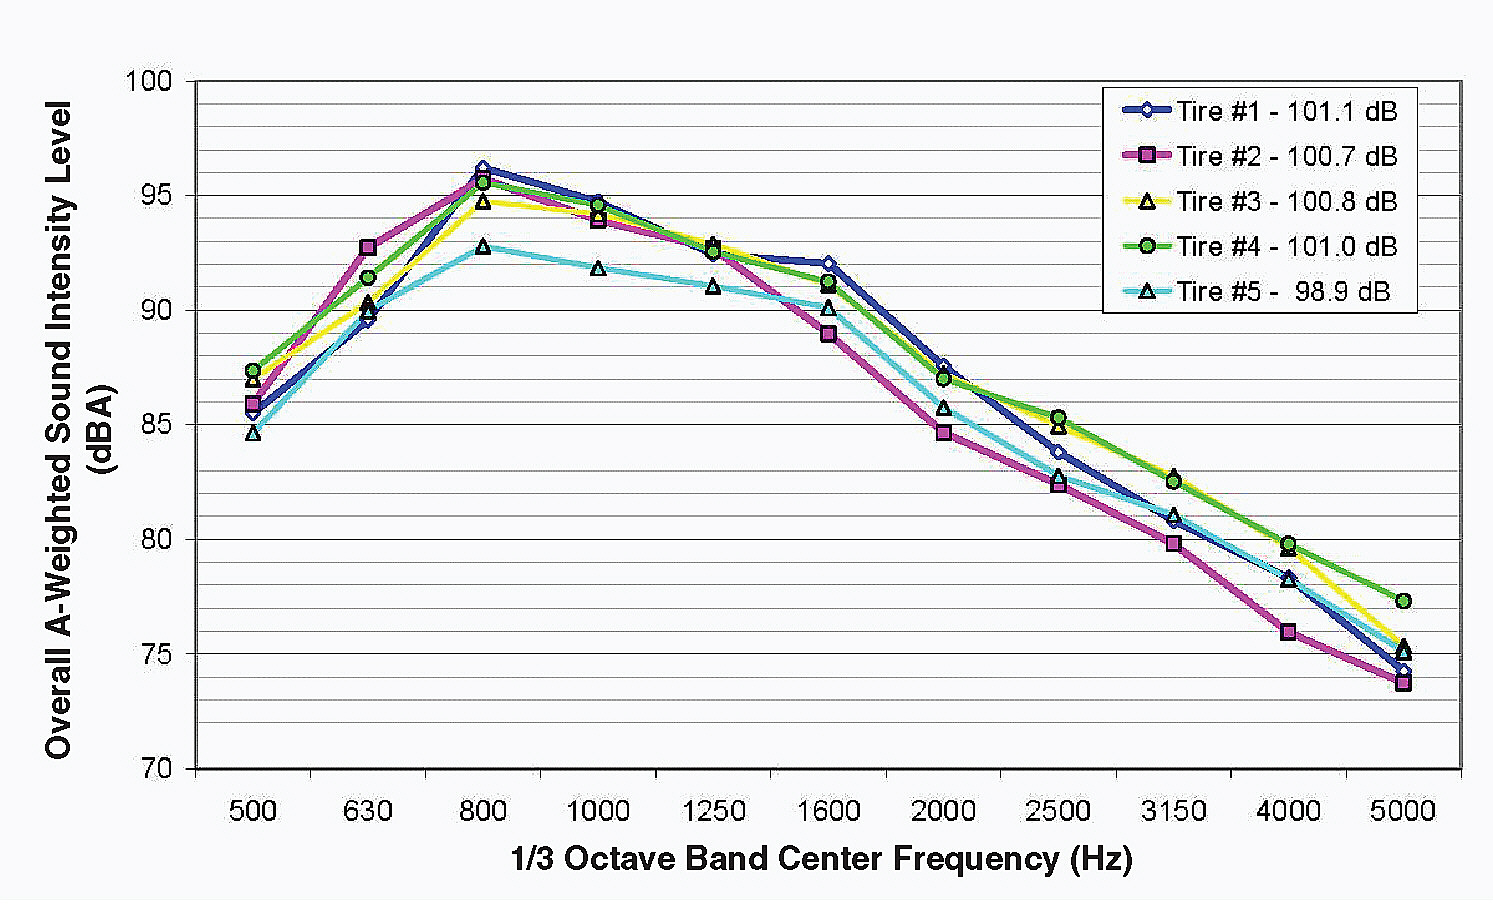 FIGURE 5-19 Range in one-third octave band sound intensity levels for tires measured at 97 kilometers per hour on a dense, graded, asphalt-concrete roadway. Source: Adapted from Donavan (2006).